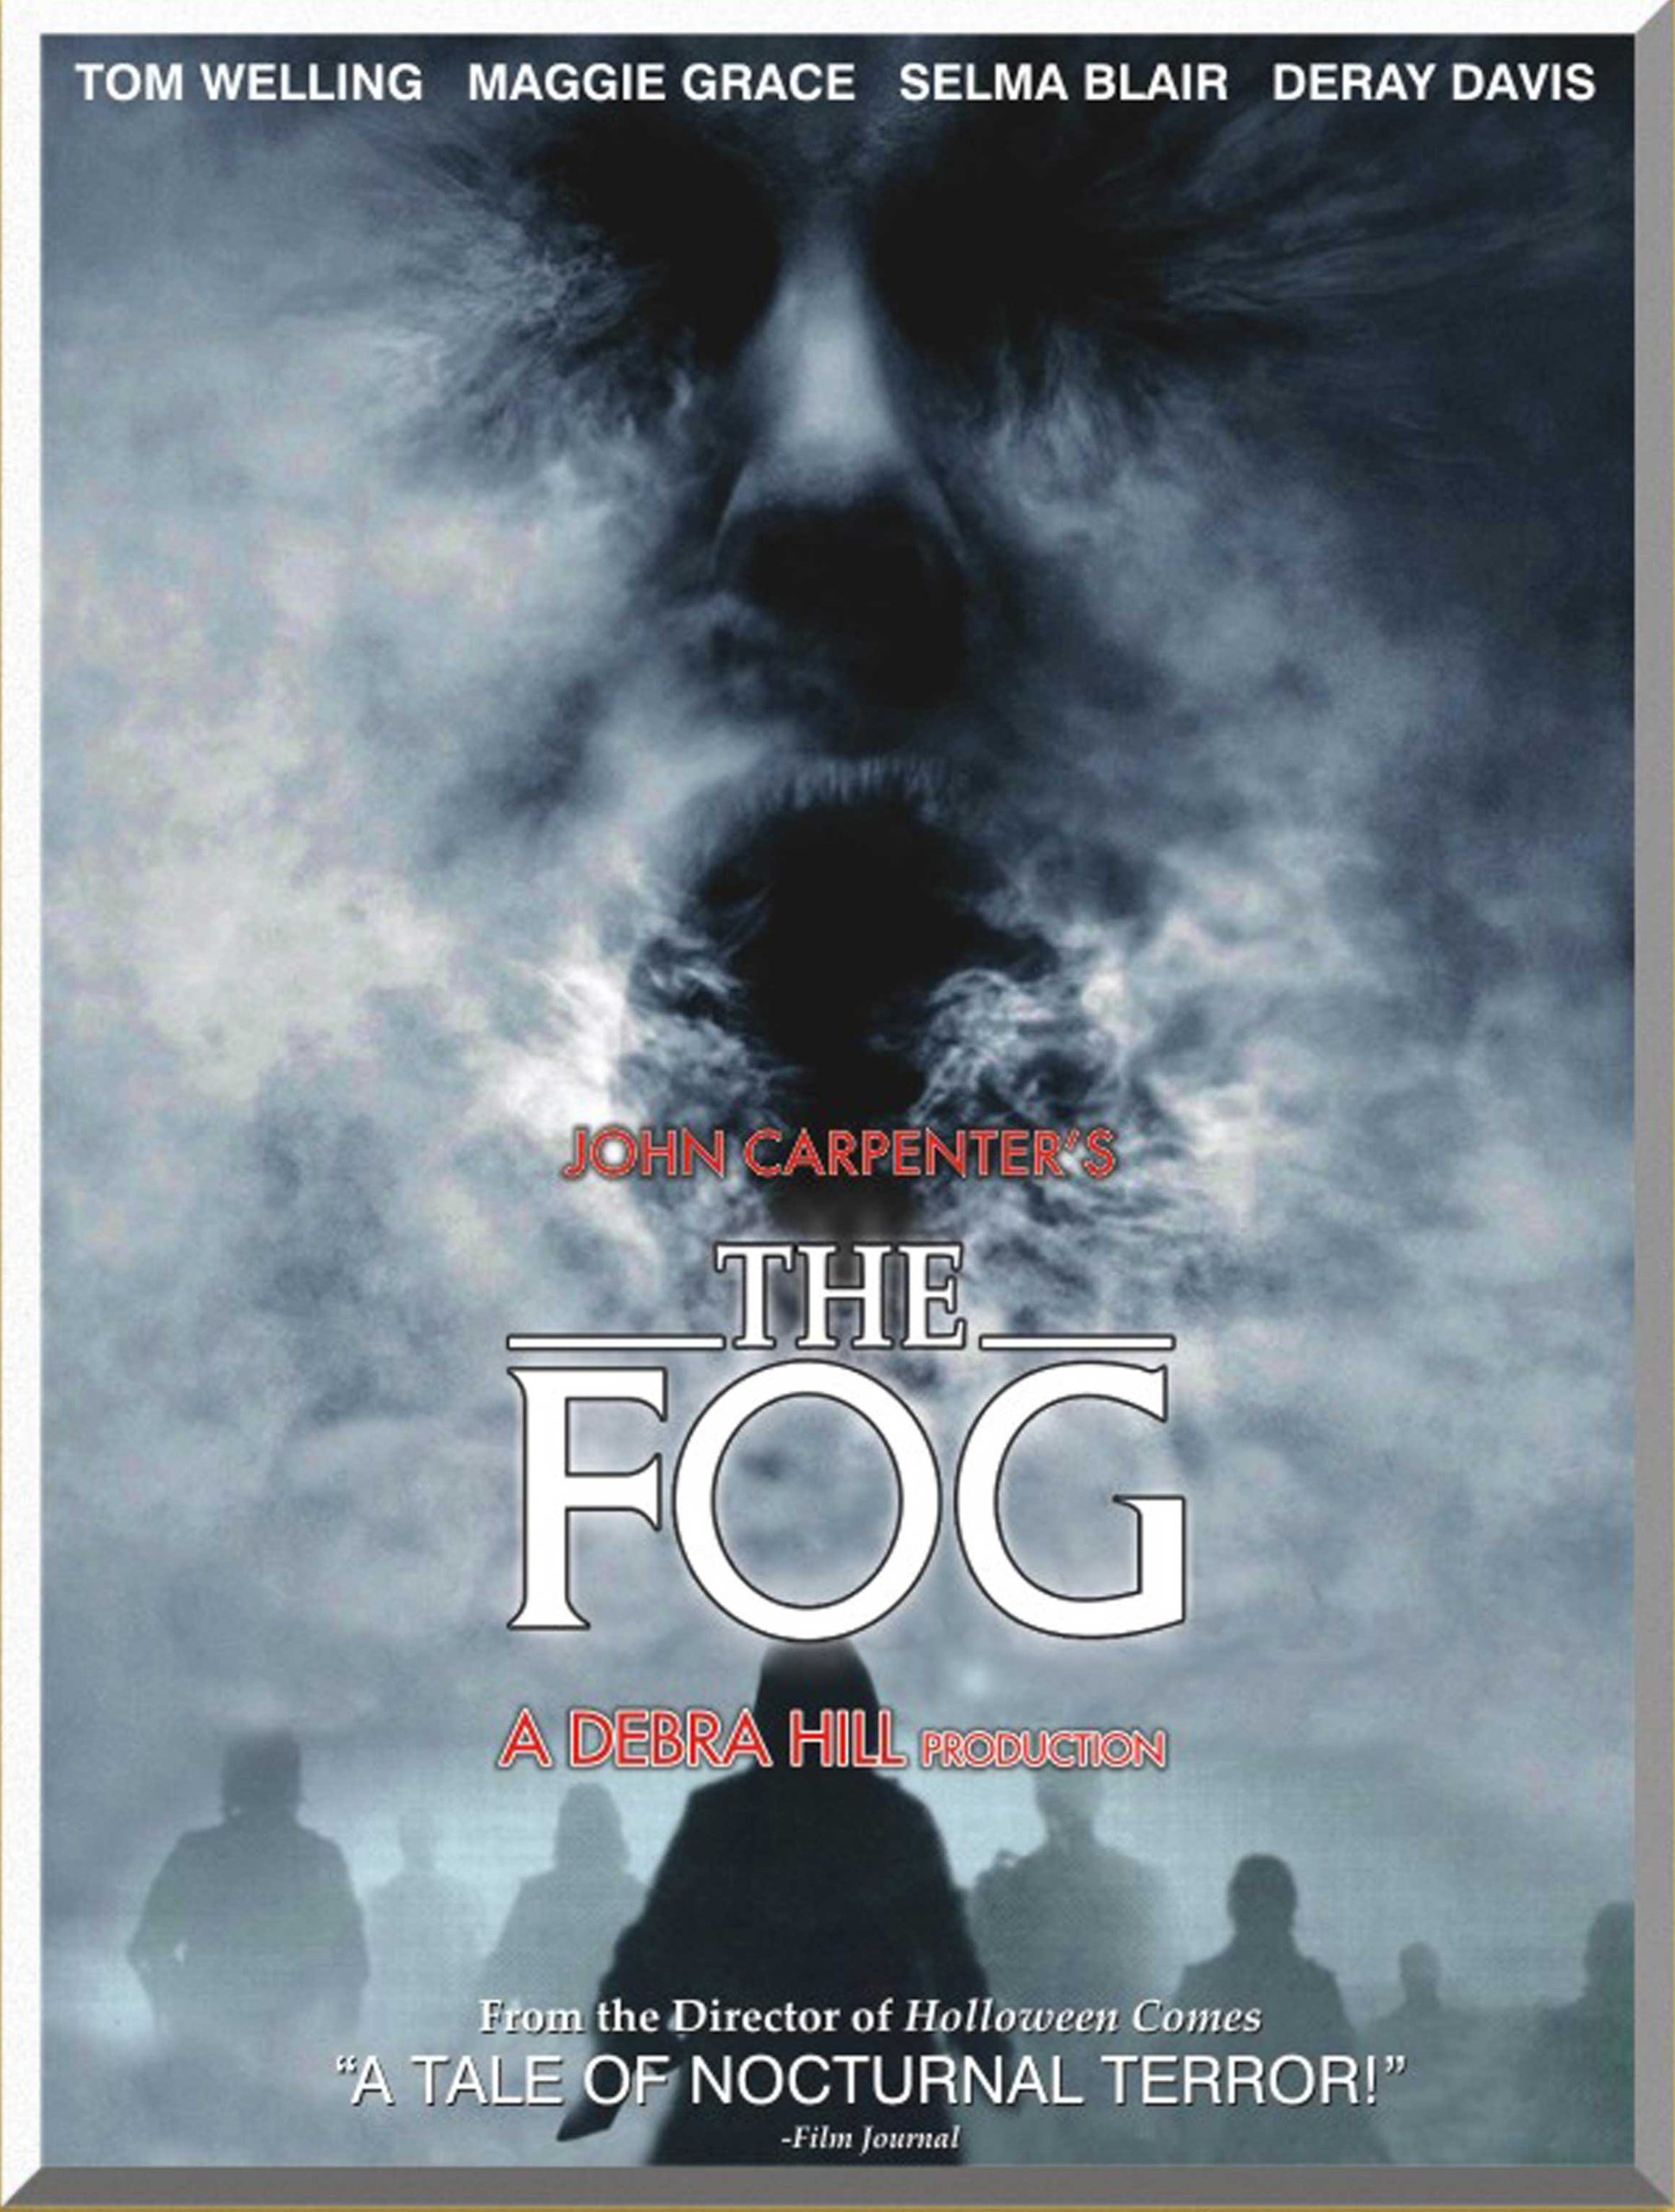 the-fog-movie-purchase-or-watch-online